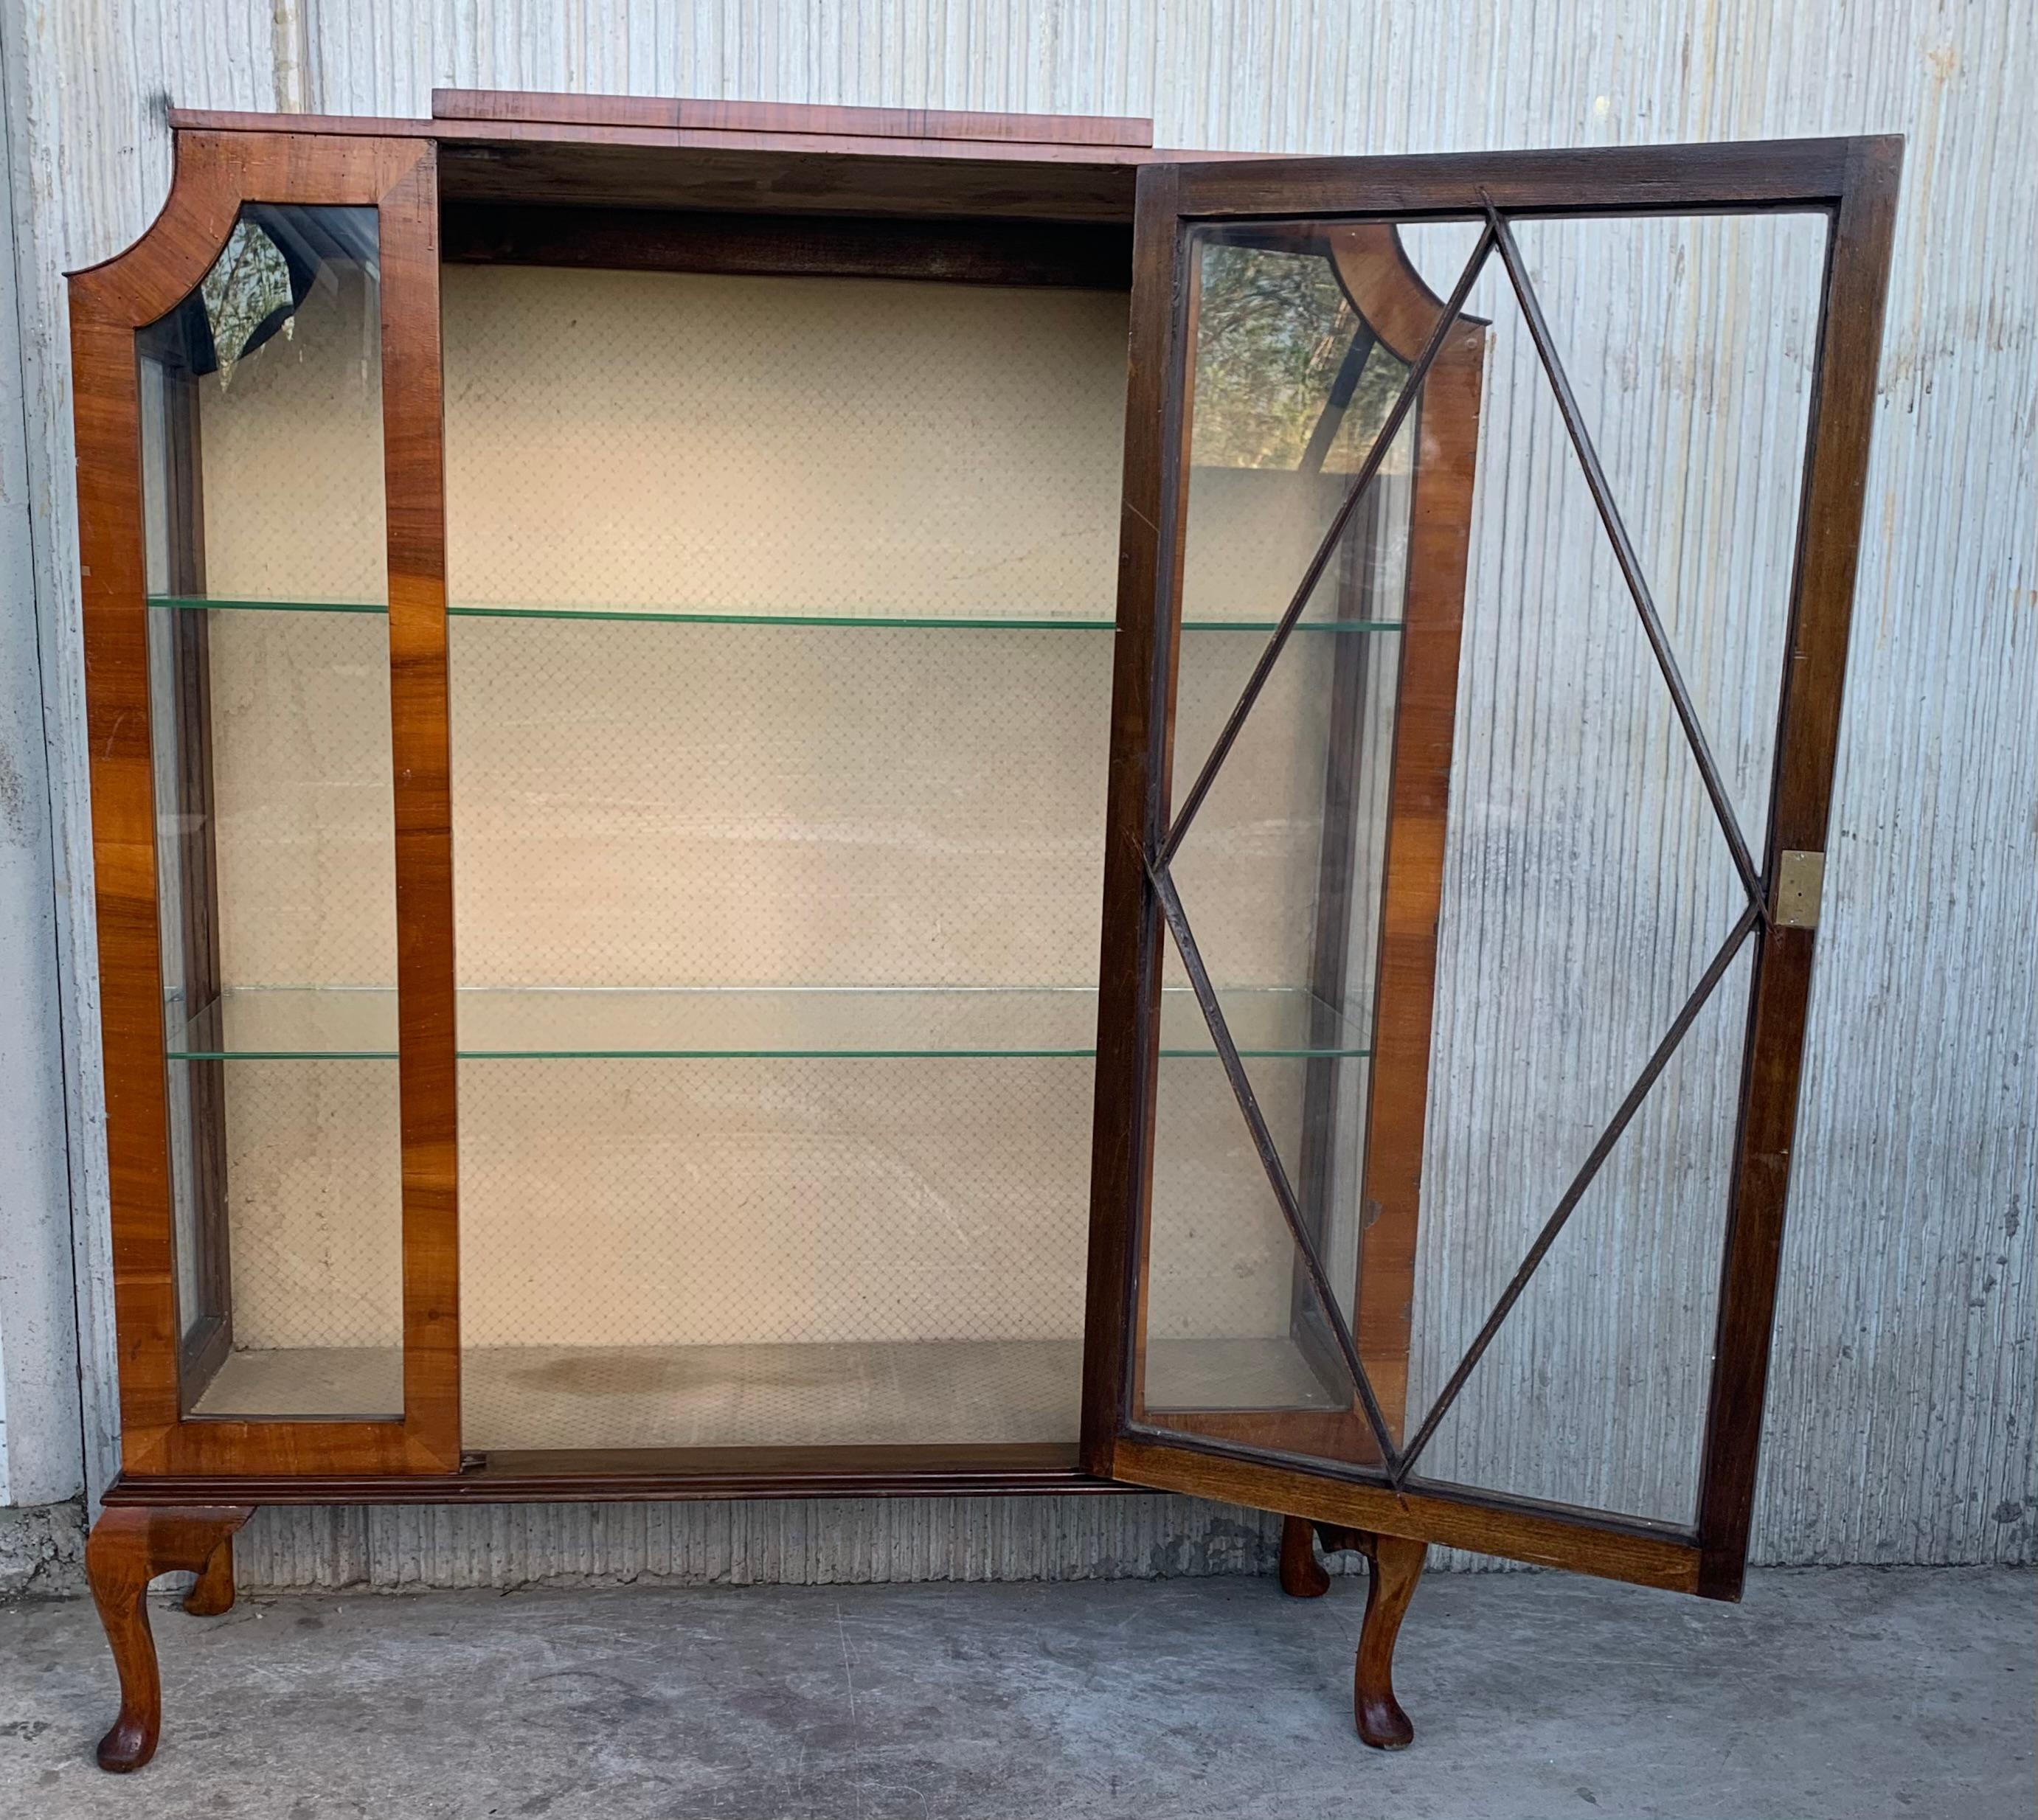 Art Deco Cathedral Display Cabinet with Cabriole Legs, Vitrine, circa 1930 For Sale 1